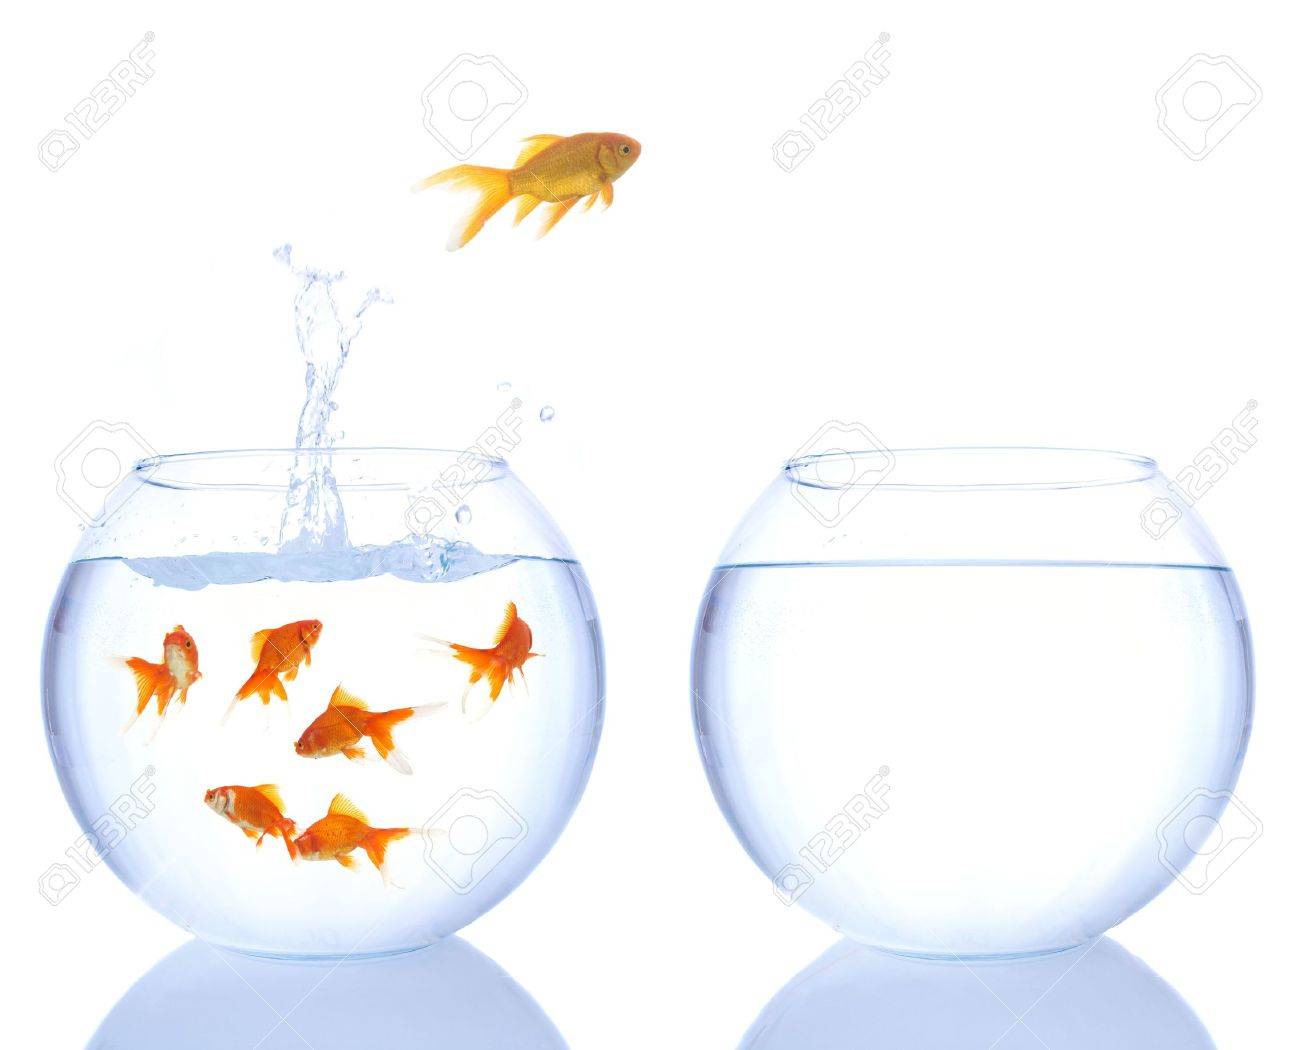 goldfish jumping out of a bowl